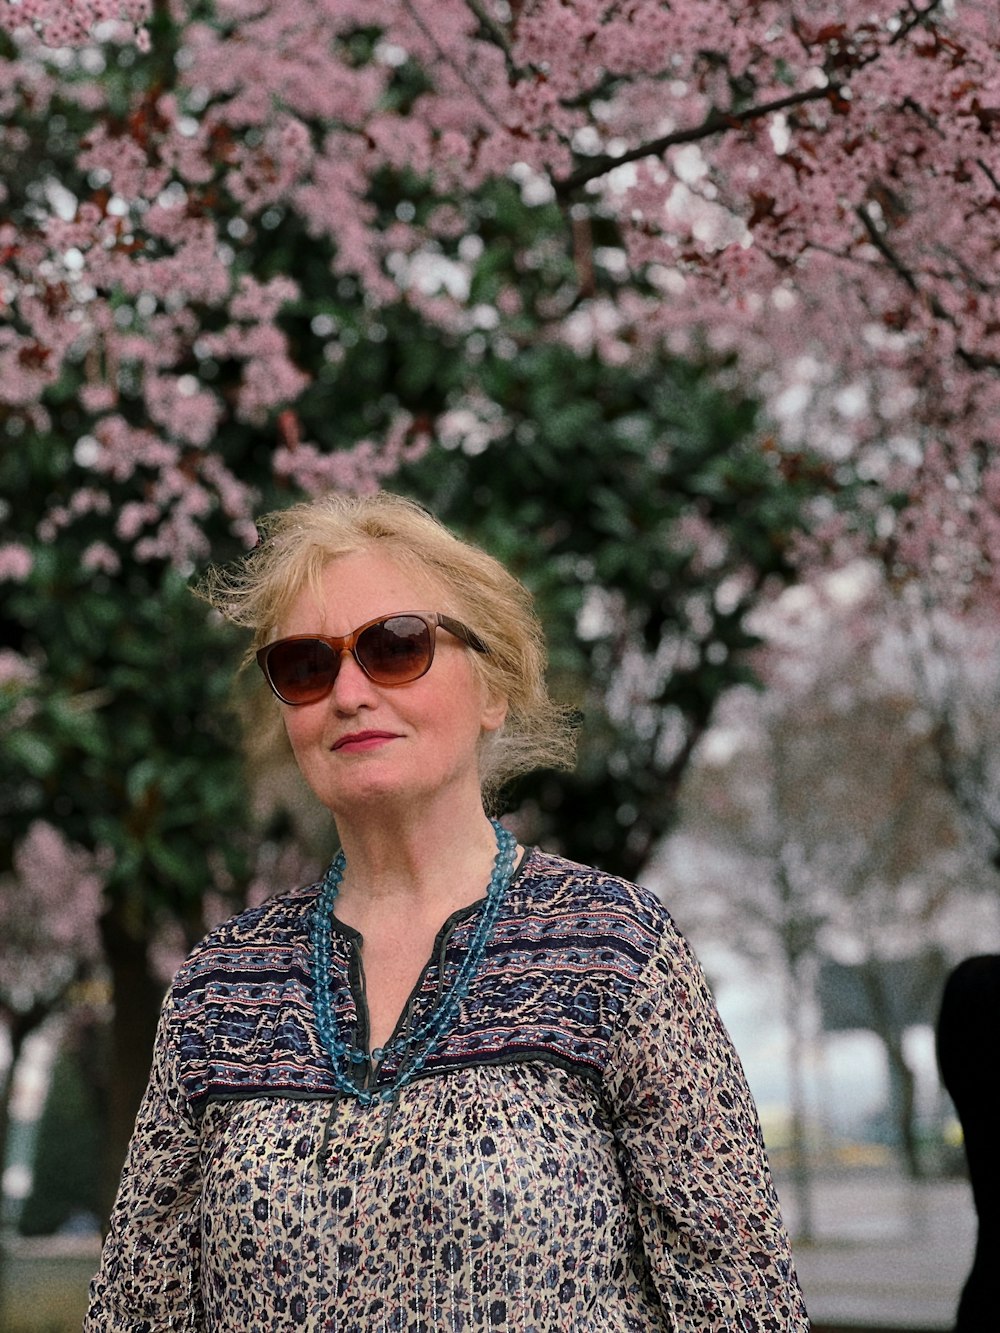 a woman in sunglasses standing under a tree with pink flowers